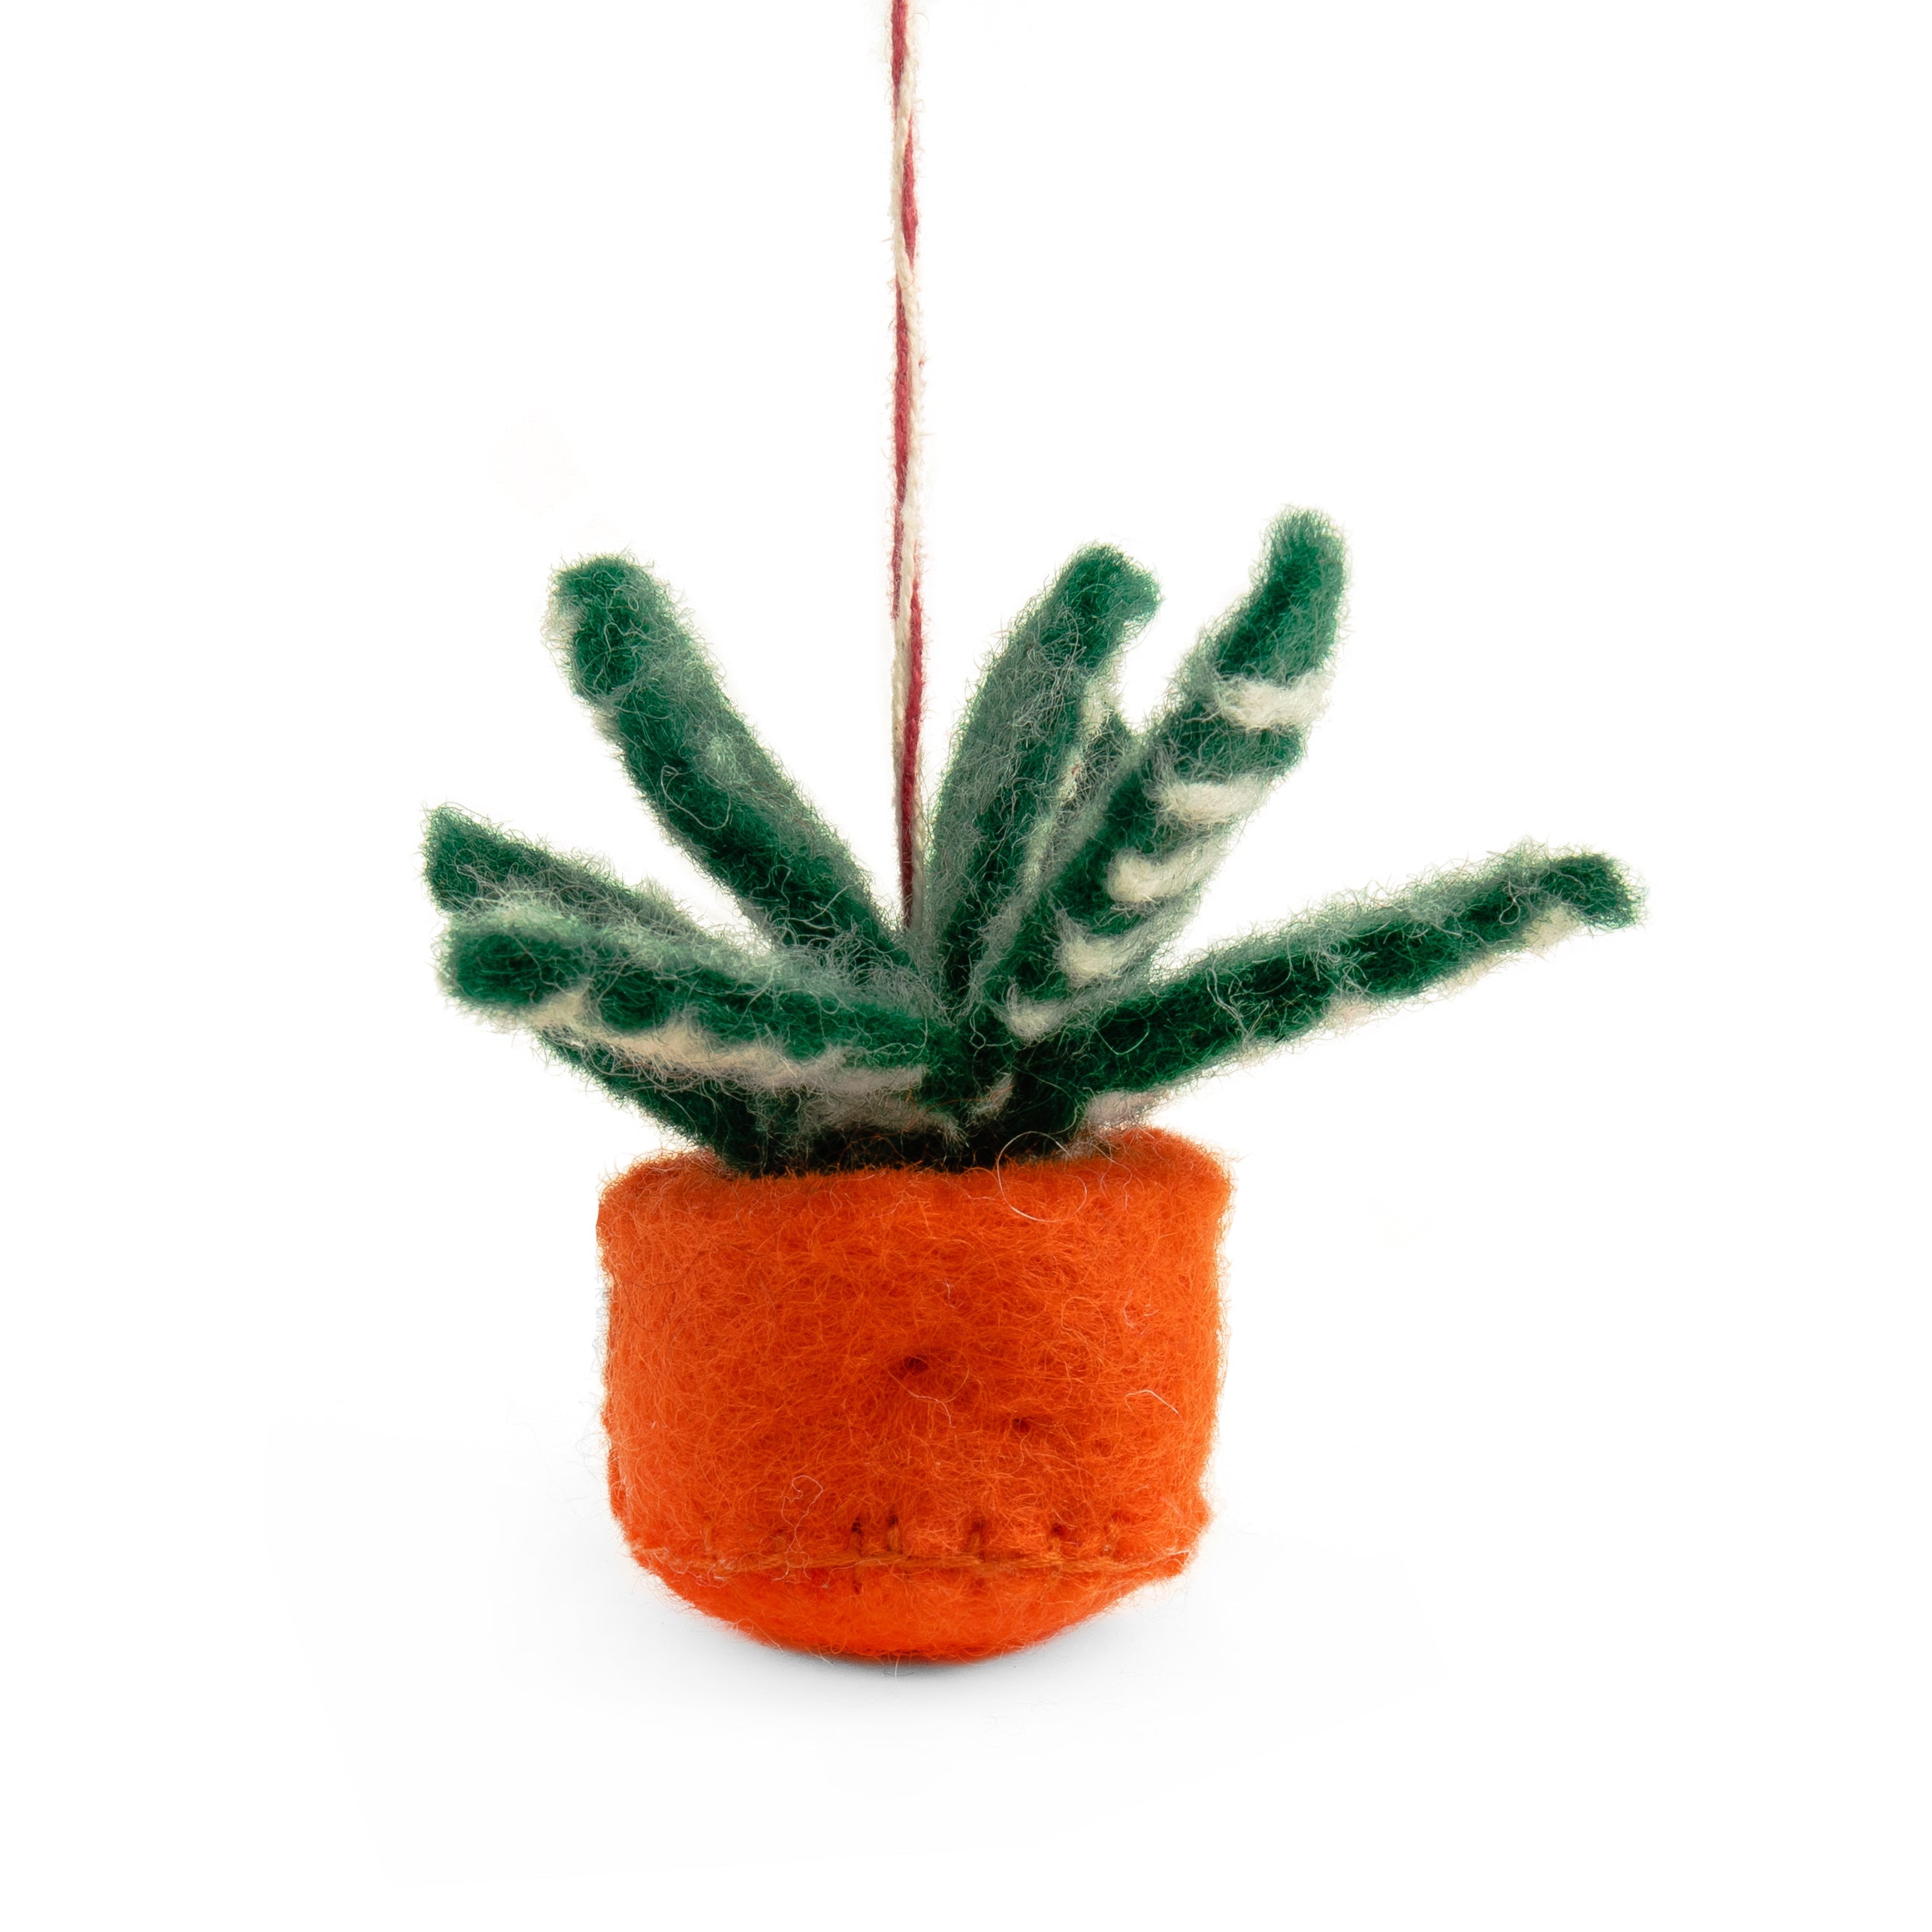 Potted Plant - Christmas Decoration